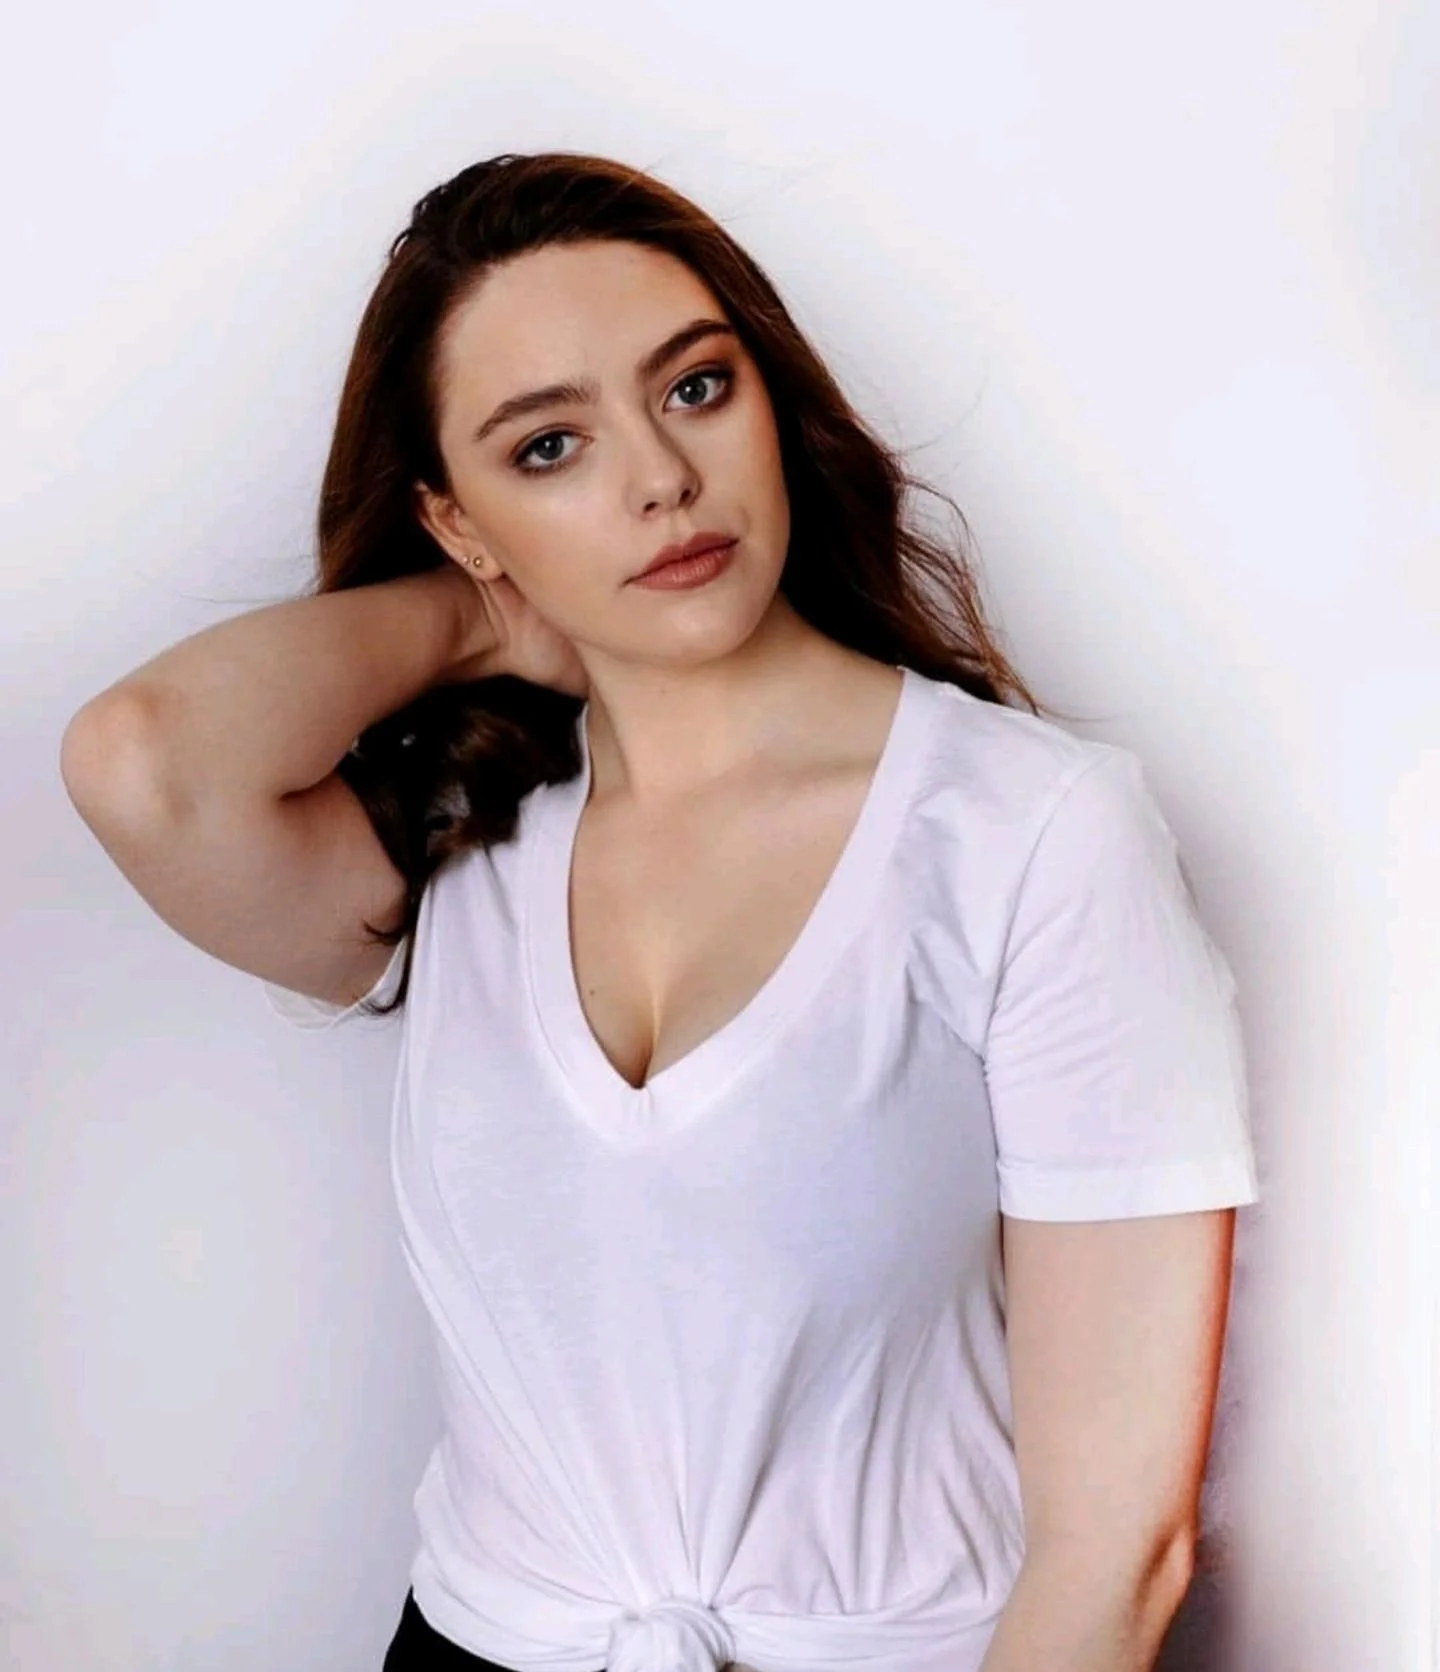 How did Danielle Rose Russell lose weight?